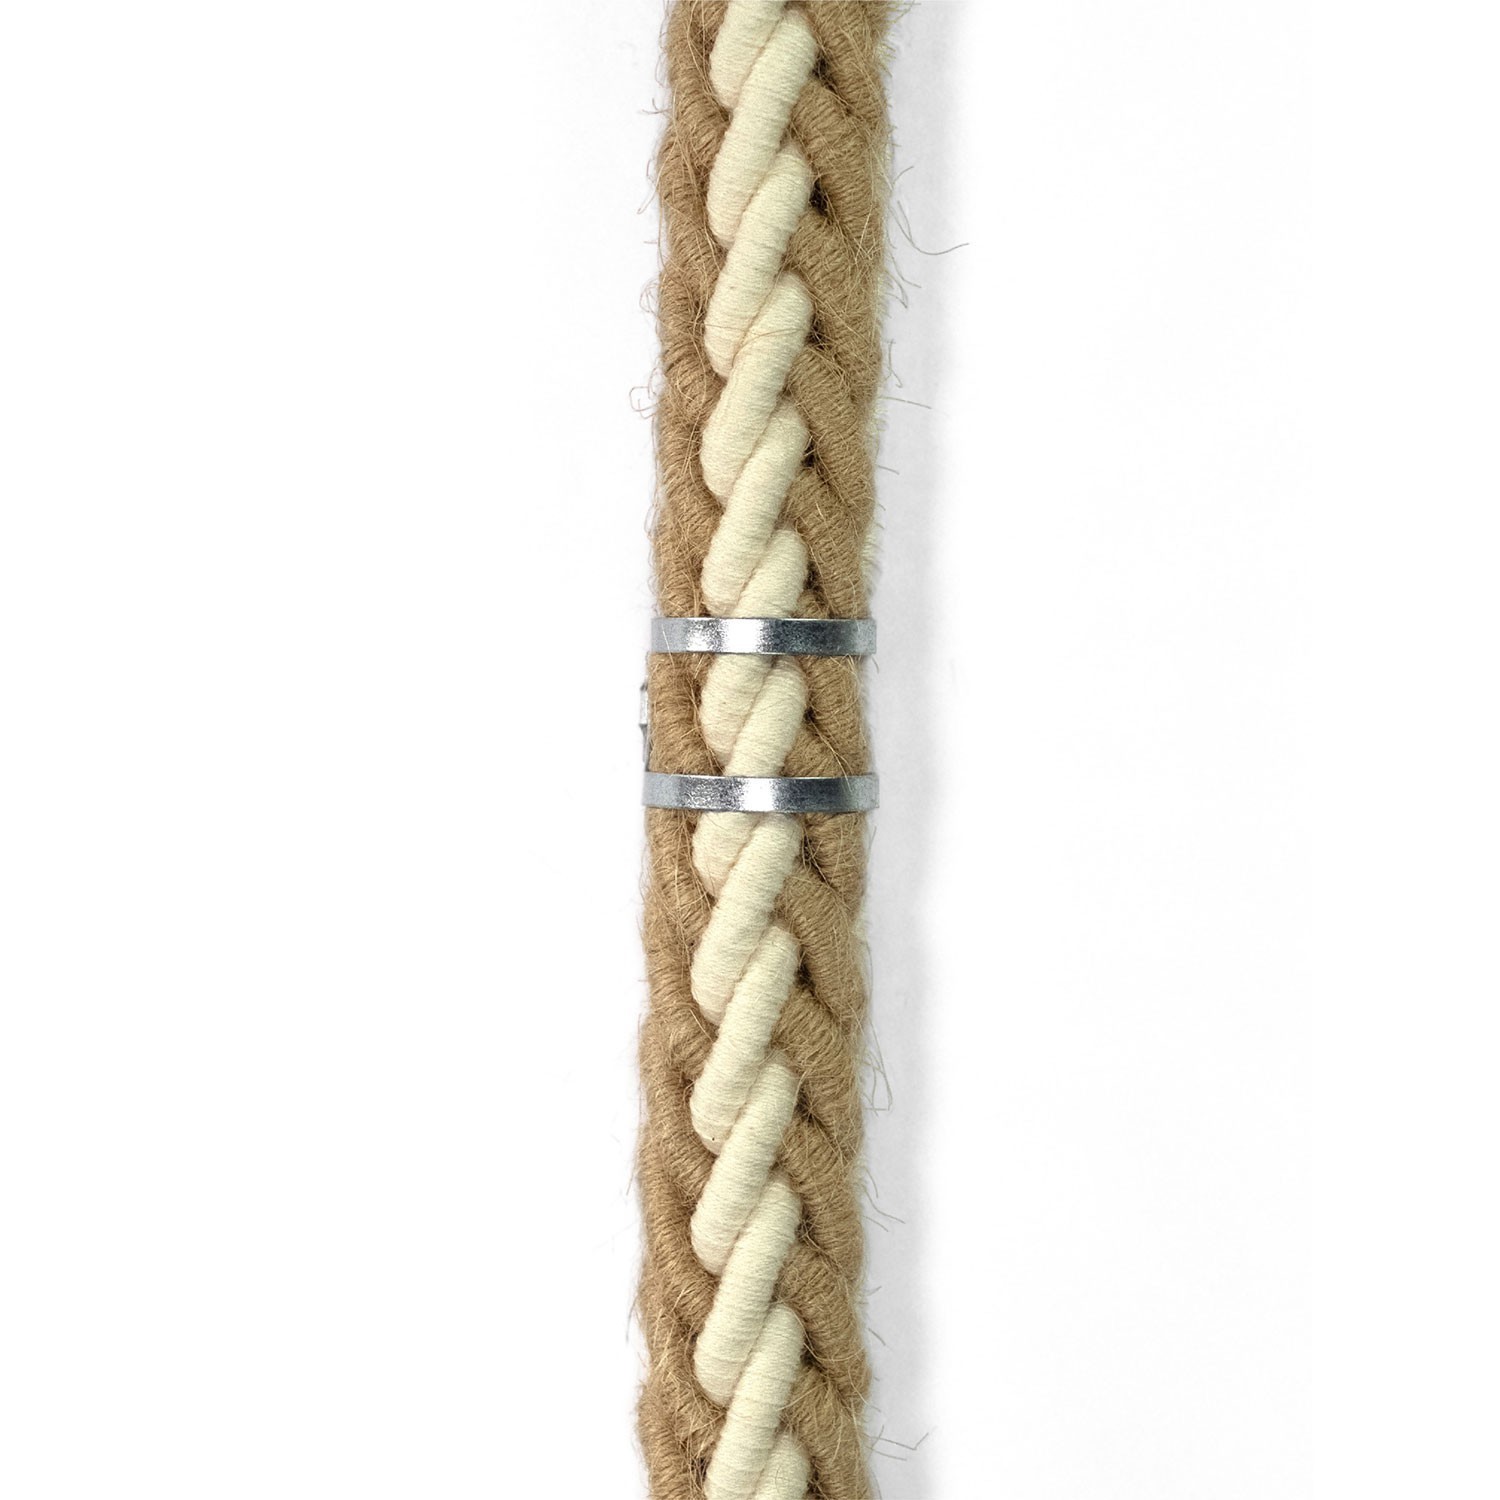 SnakeBis Chord - Plug-in lamp with jute twisted cable